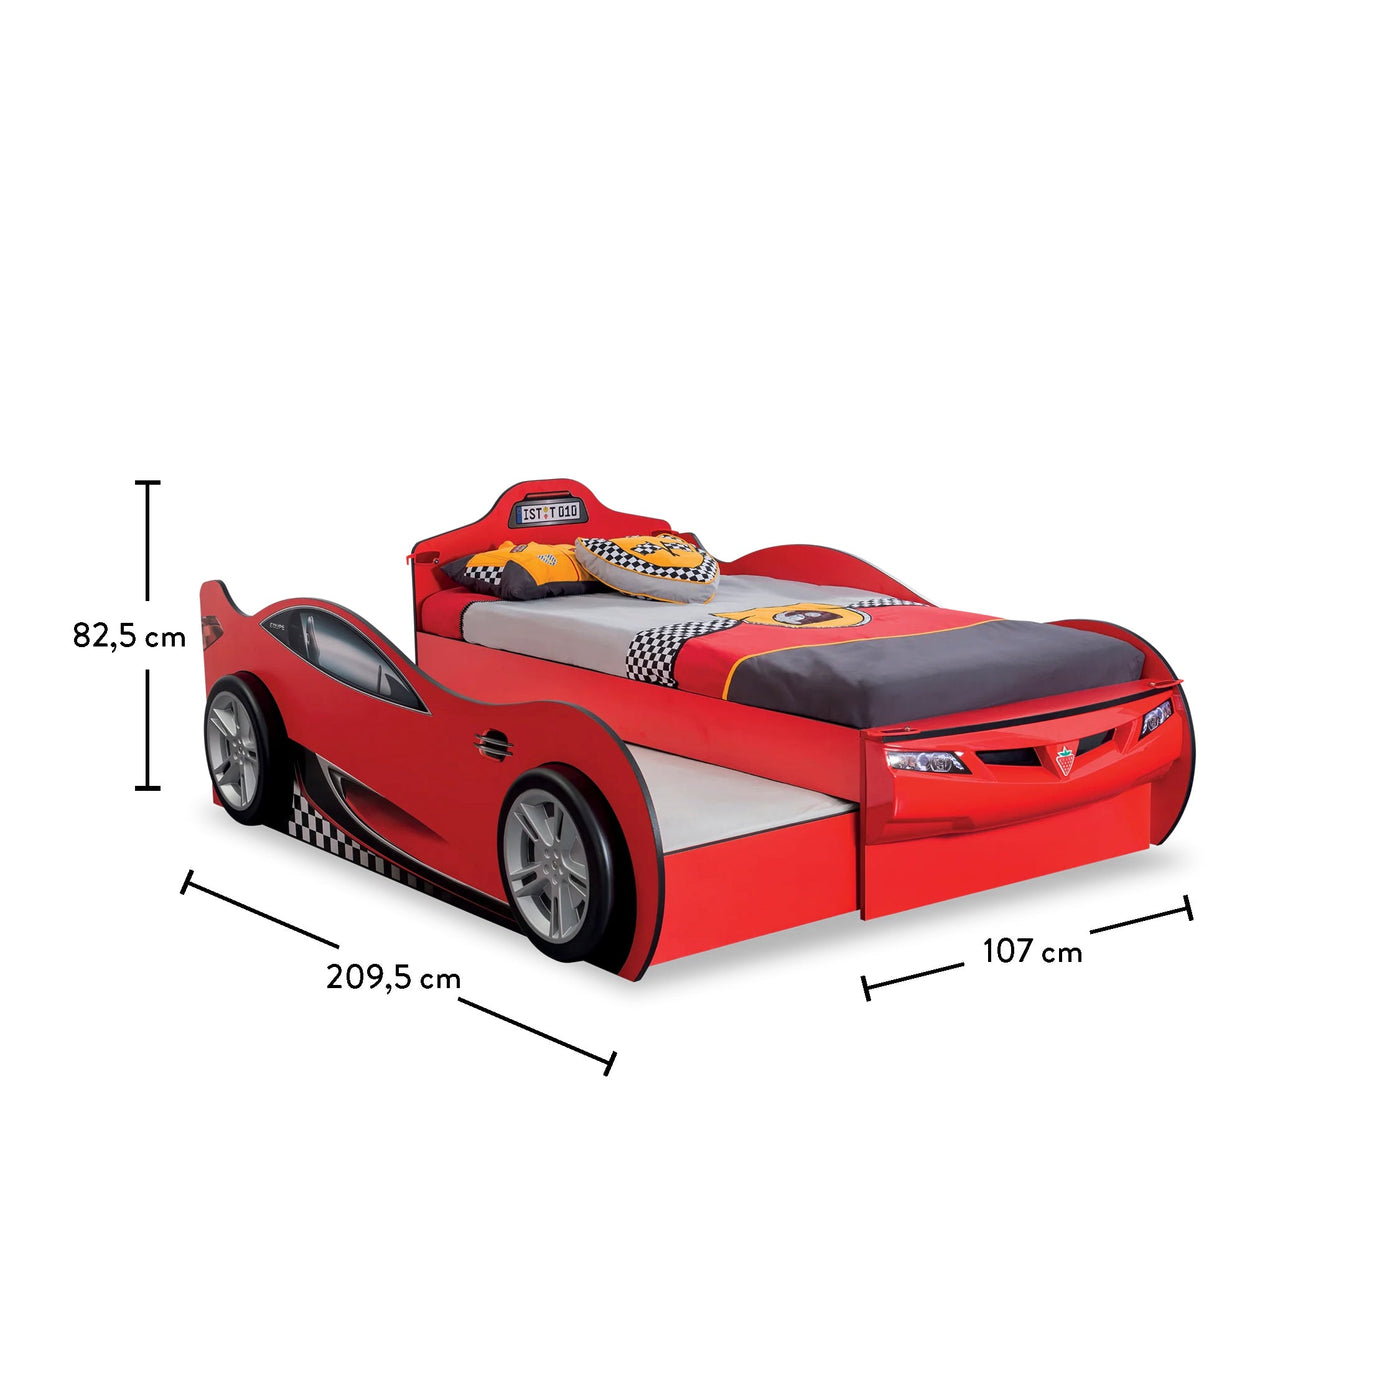 Race Cup Carbed (With Friend Bed) (Red) (90x190 - 90x180 cm)